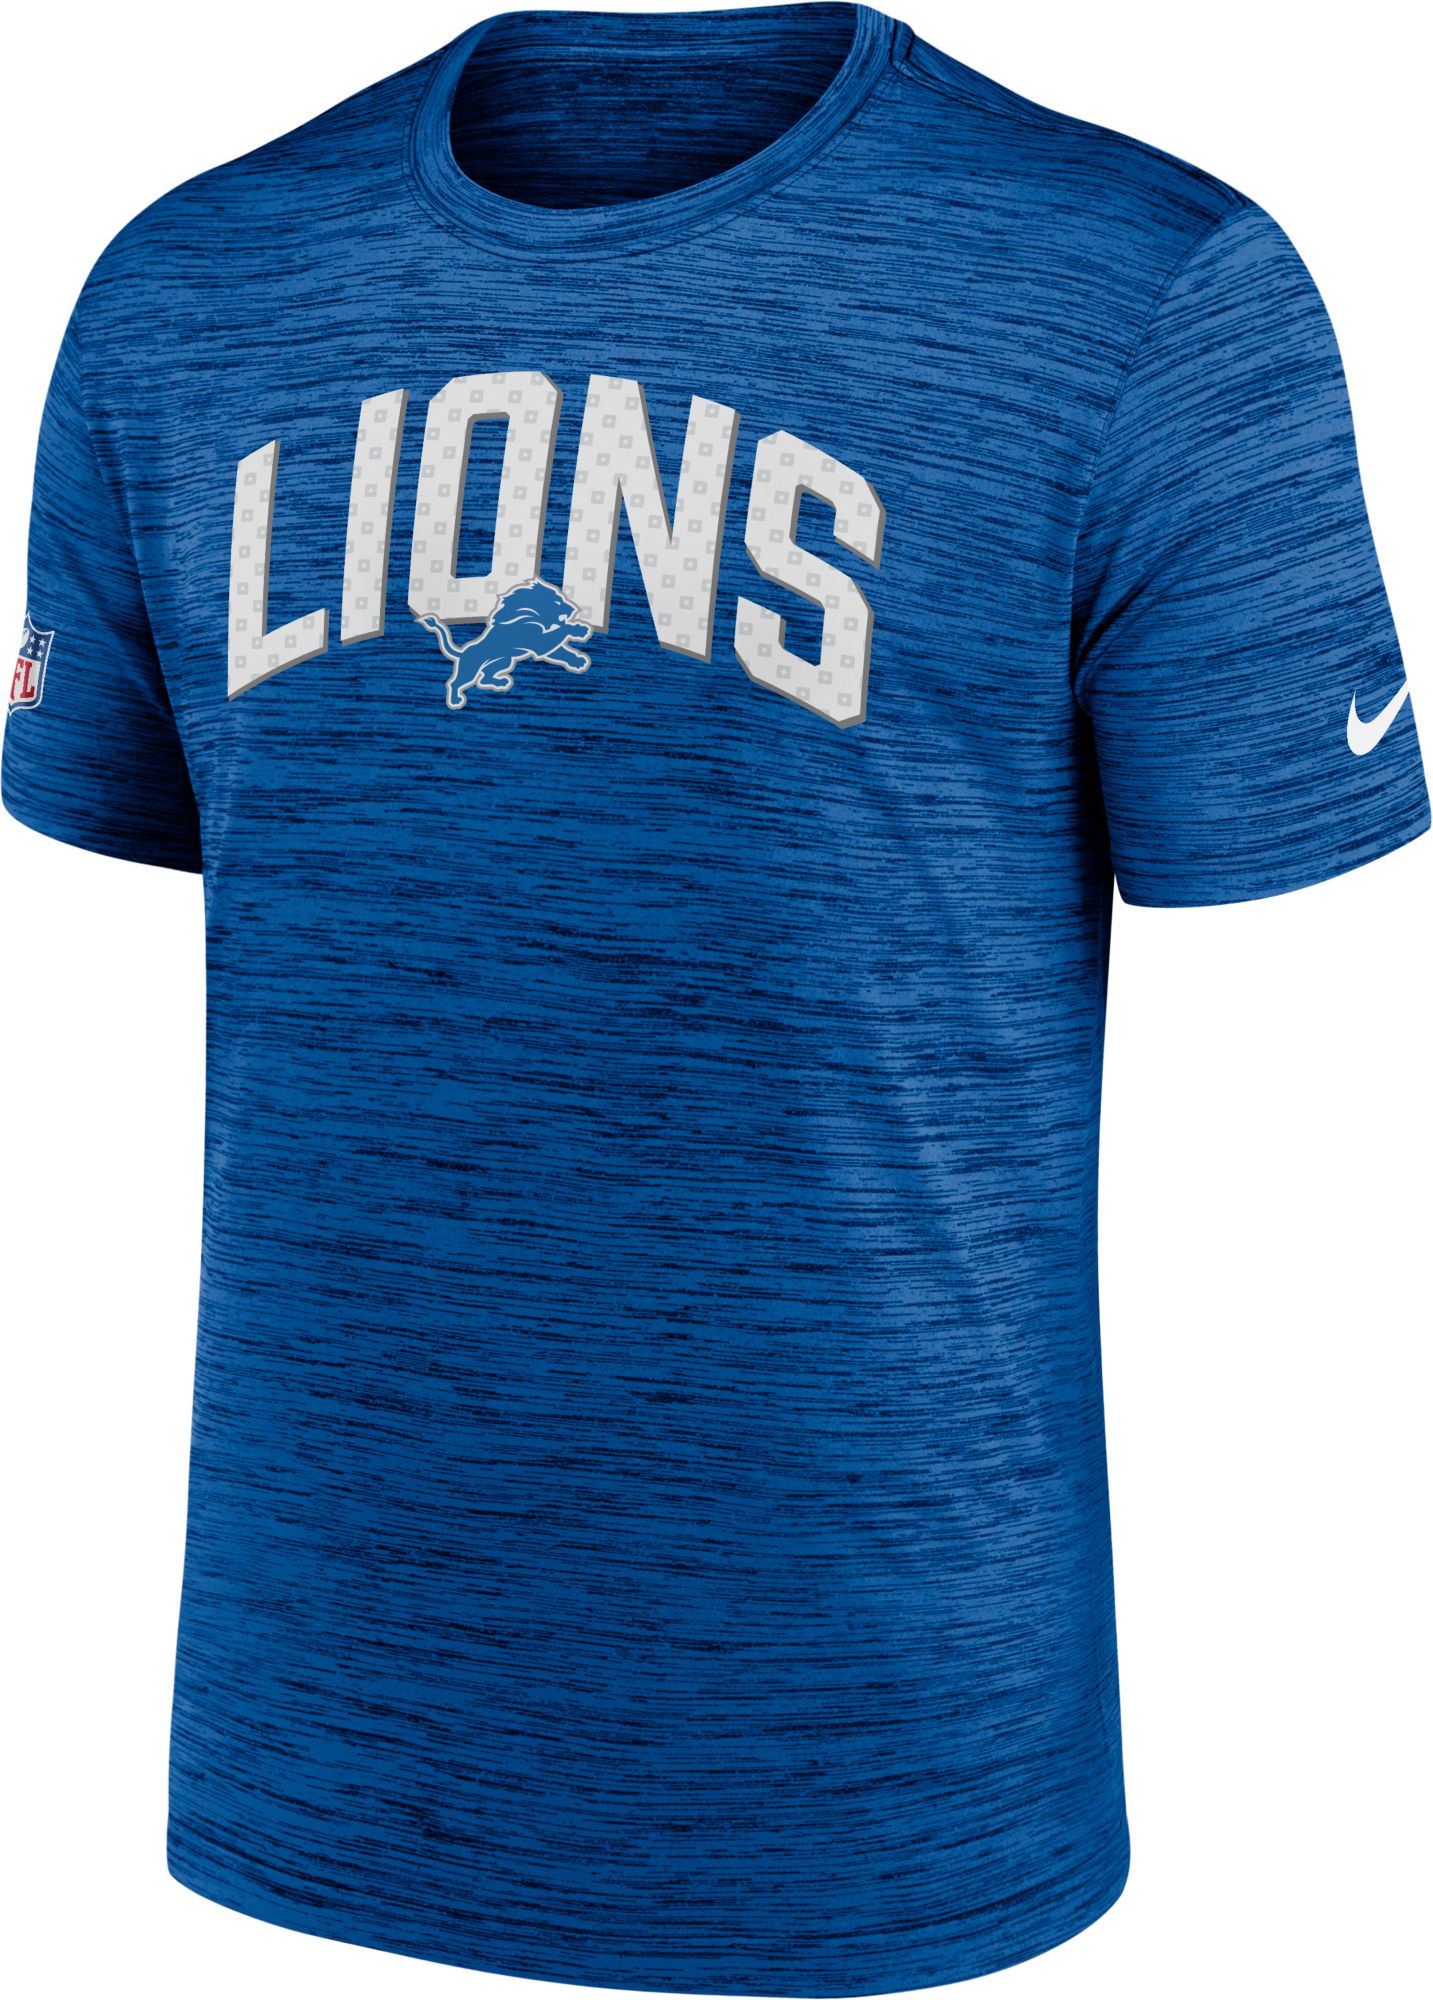 Original Youth Detroit Tigers Nike Collection Legend Performance T